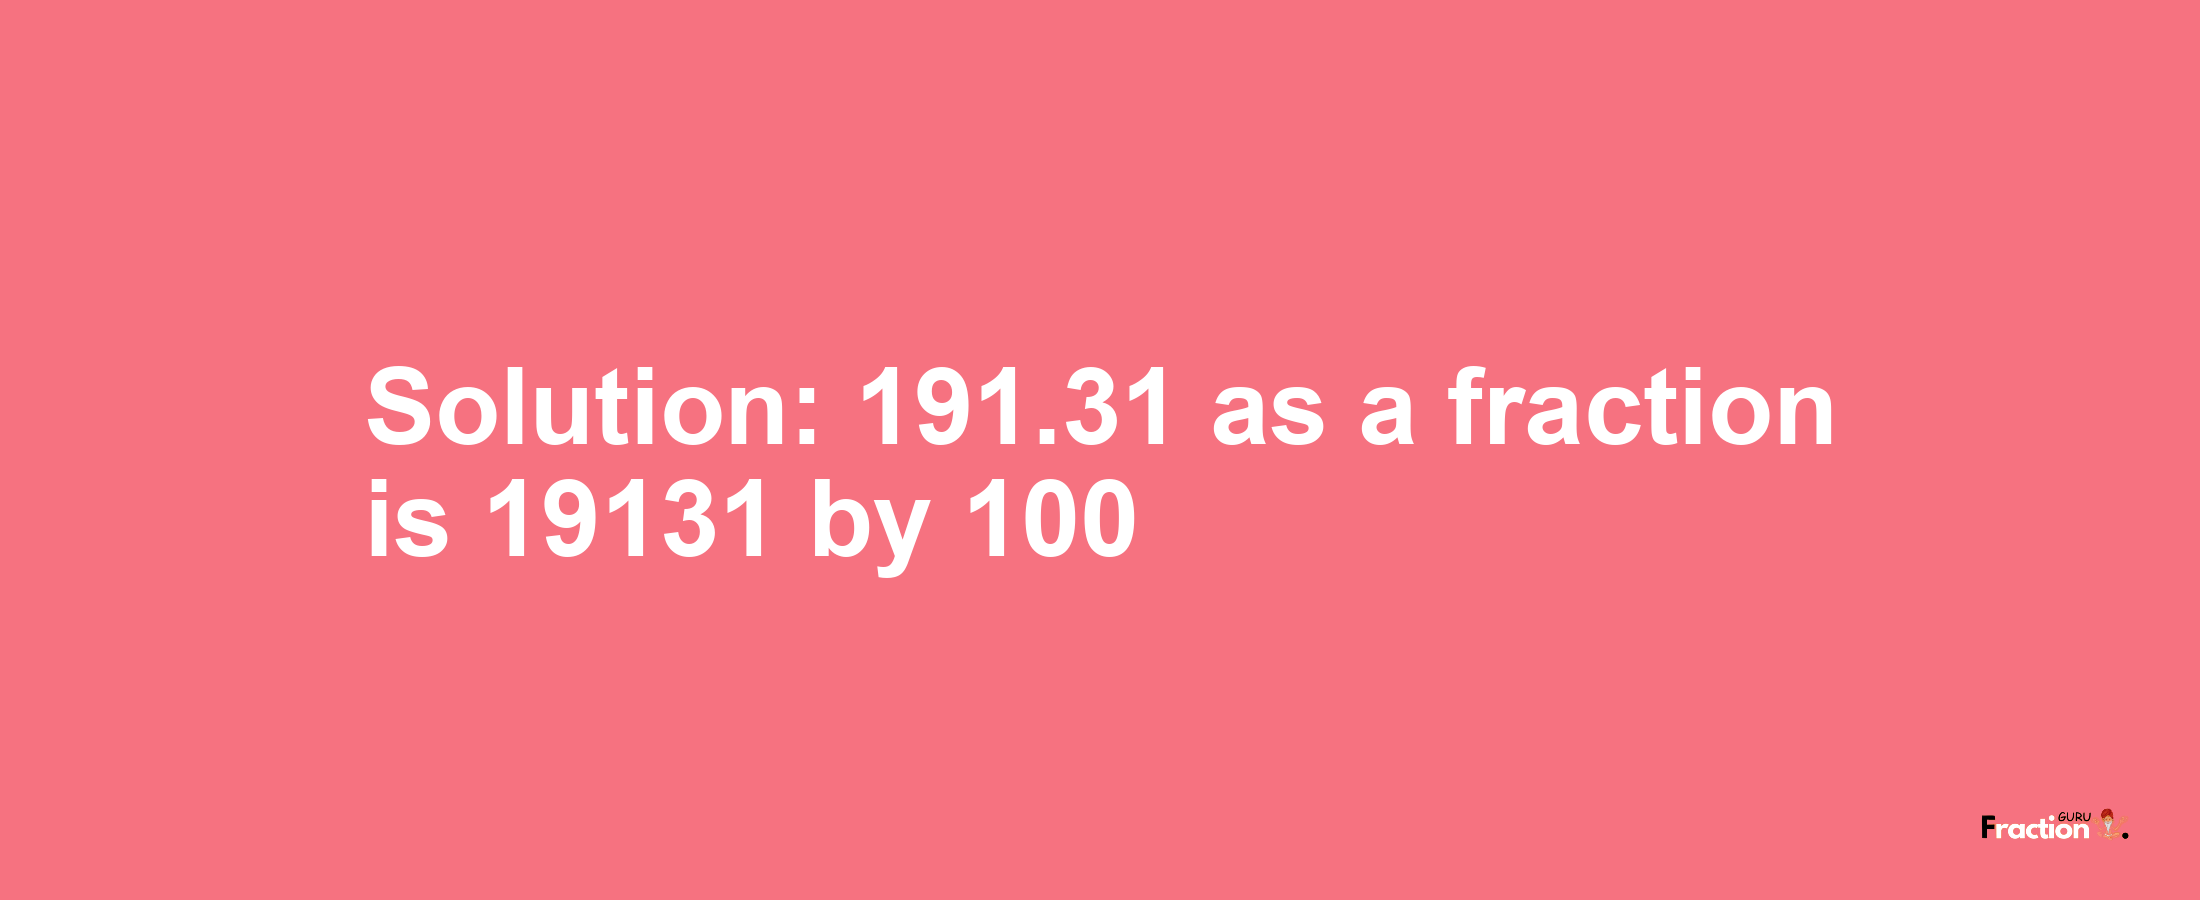 Solution:191.31 as a fraction is 19131/100